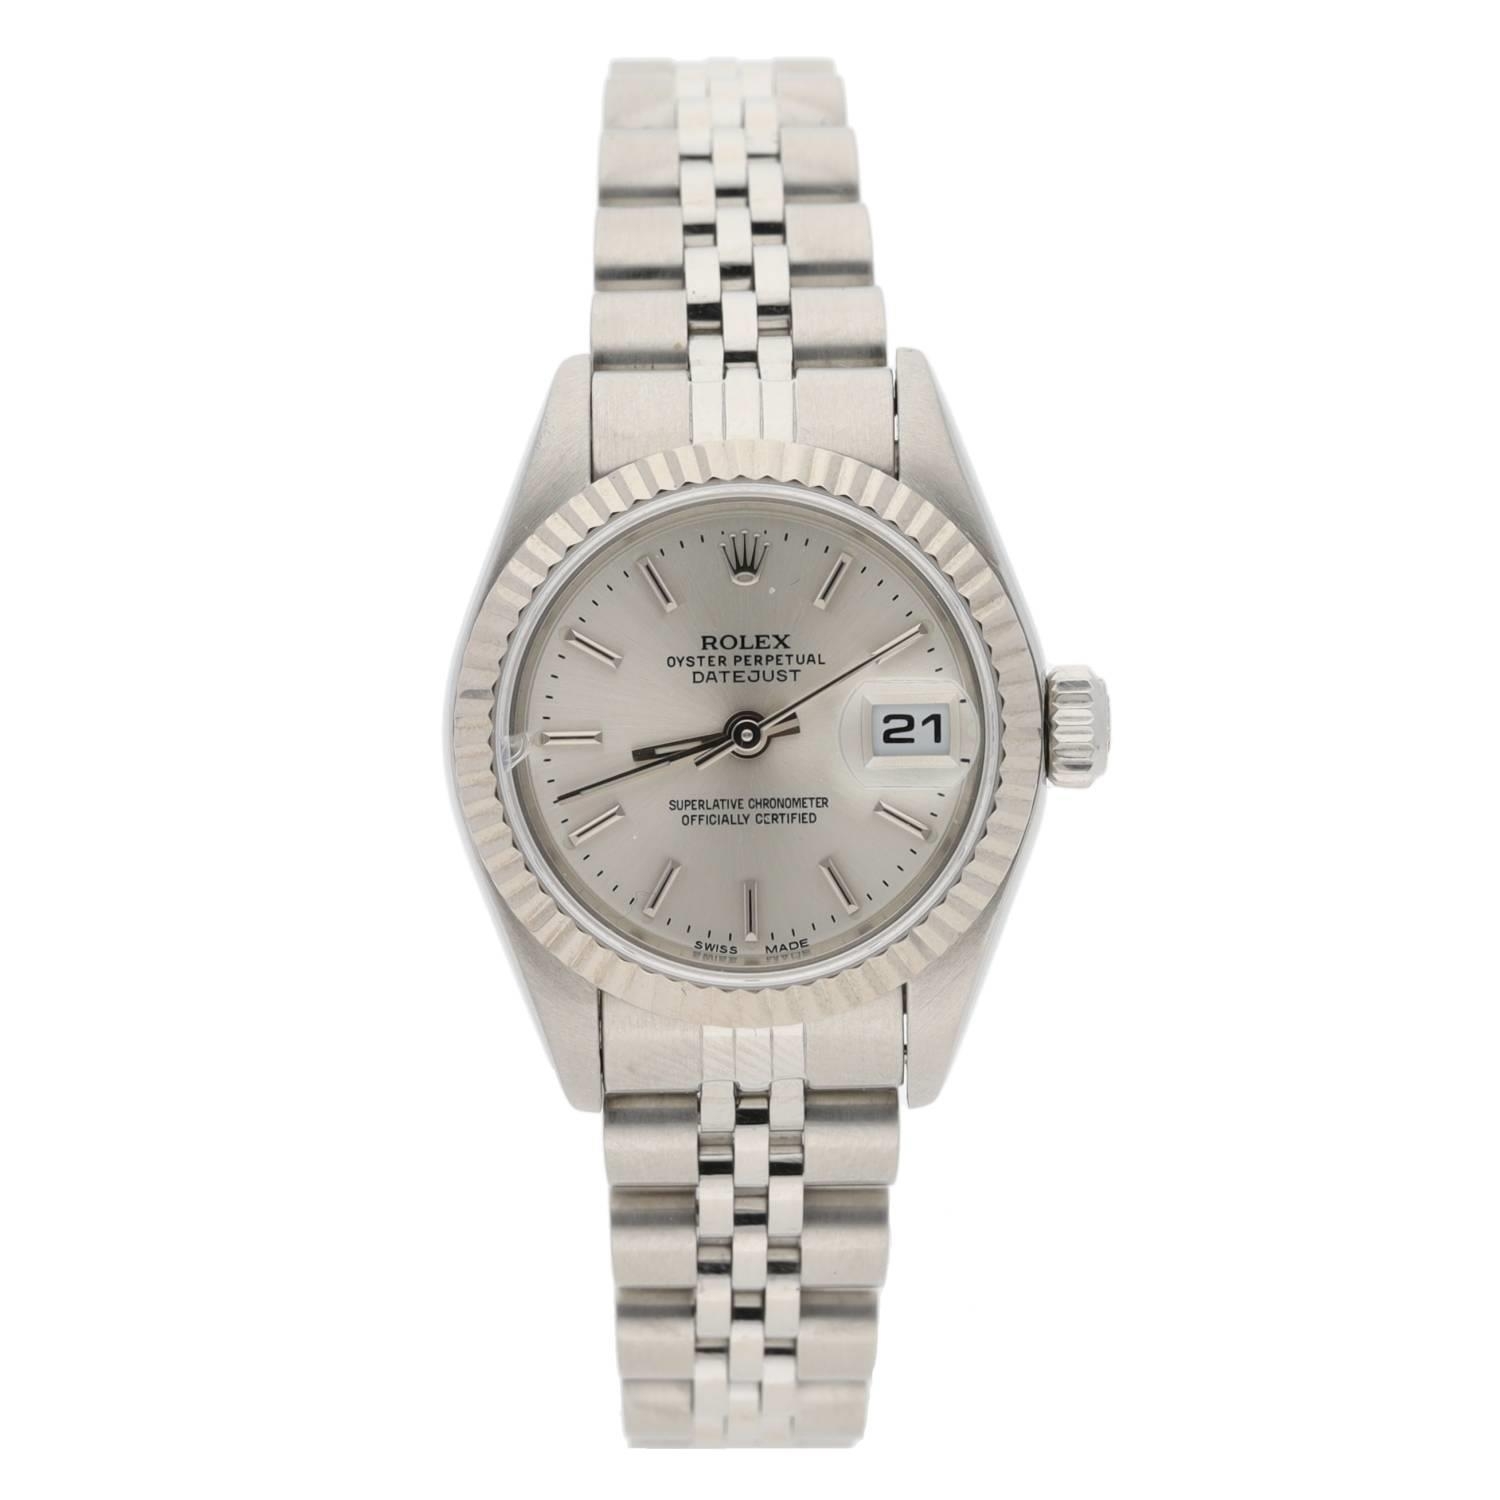 Rolex Oyster Perpetual Datejust white gold and stainless steel lady's wristwatch, reference no.